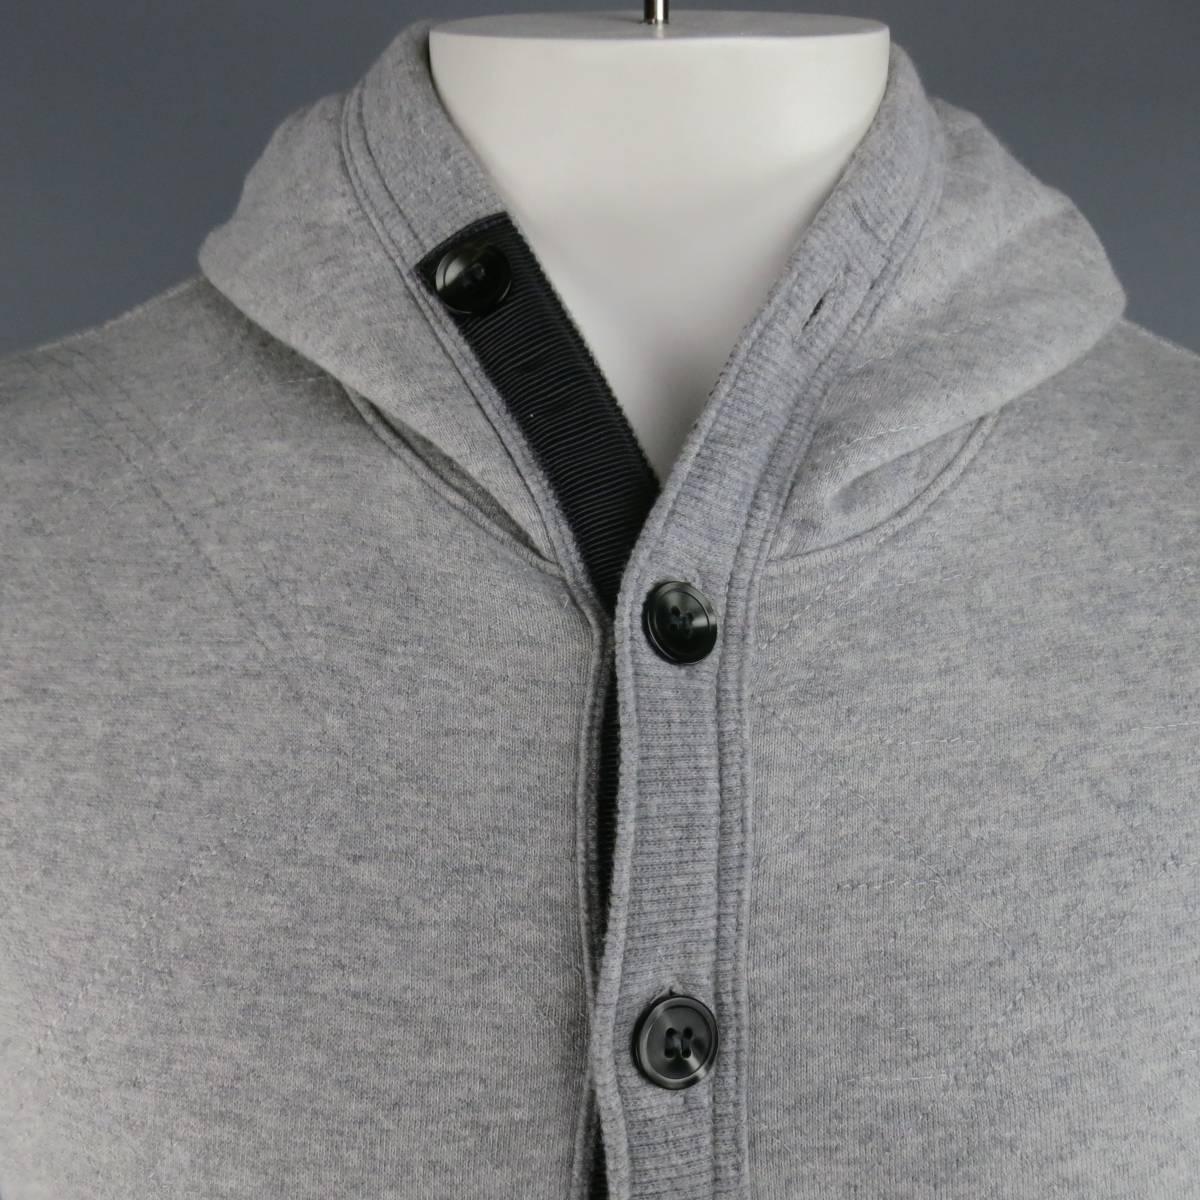 THOM BROWNE hoodie in a heather gray, quilted French terry featuring a button up closure with charcoal ribbon trim, pouch pocket with patch, ribbed piping trim throughout, and 4 bar four white stripes at the left sleeve. Made in Japan.
 
Excellent